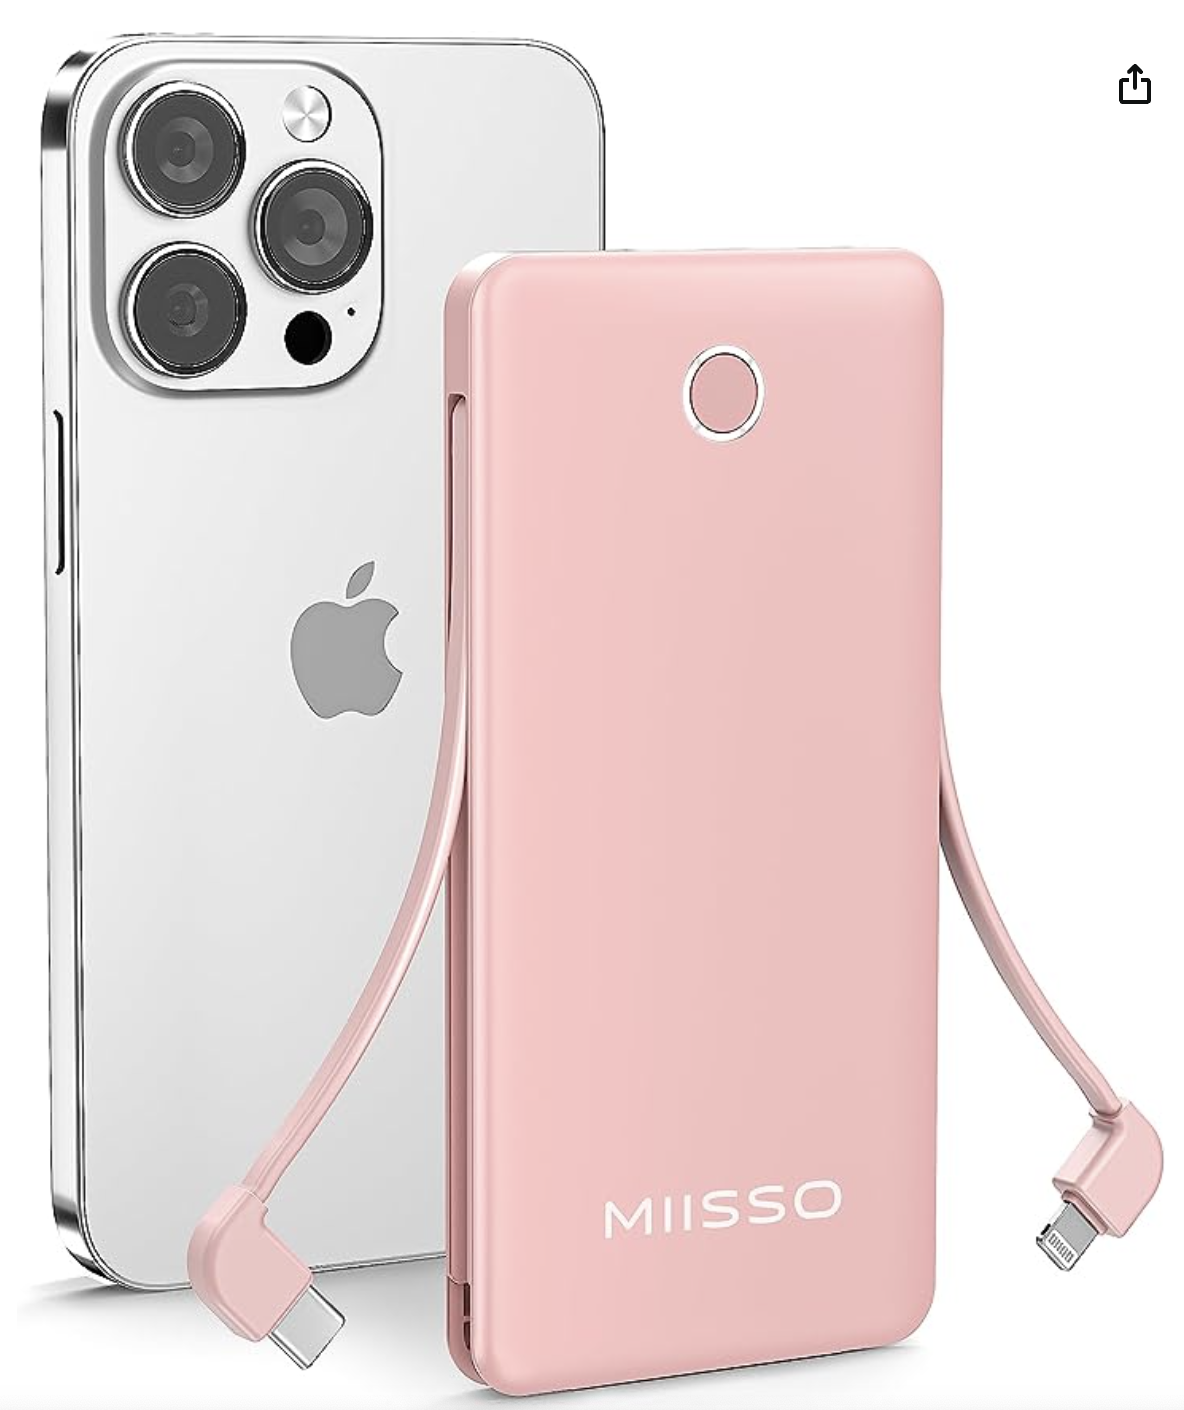 Missio Phone Charger (fun colors!)